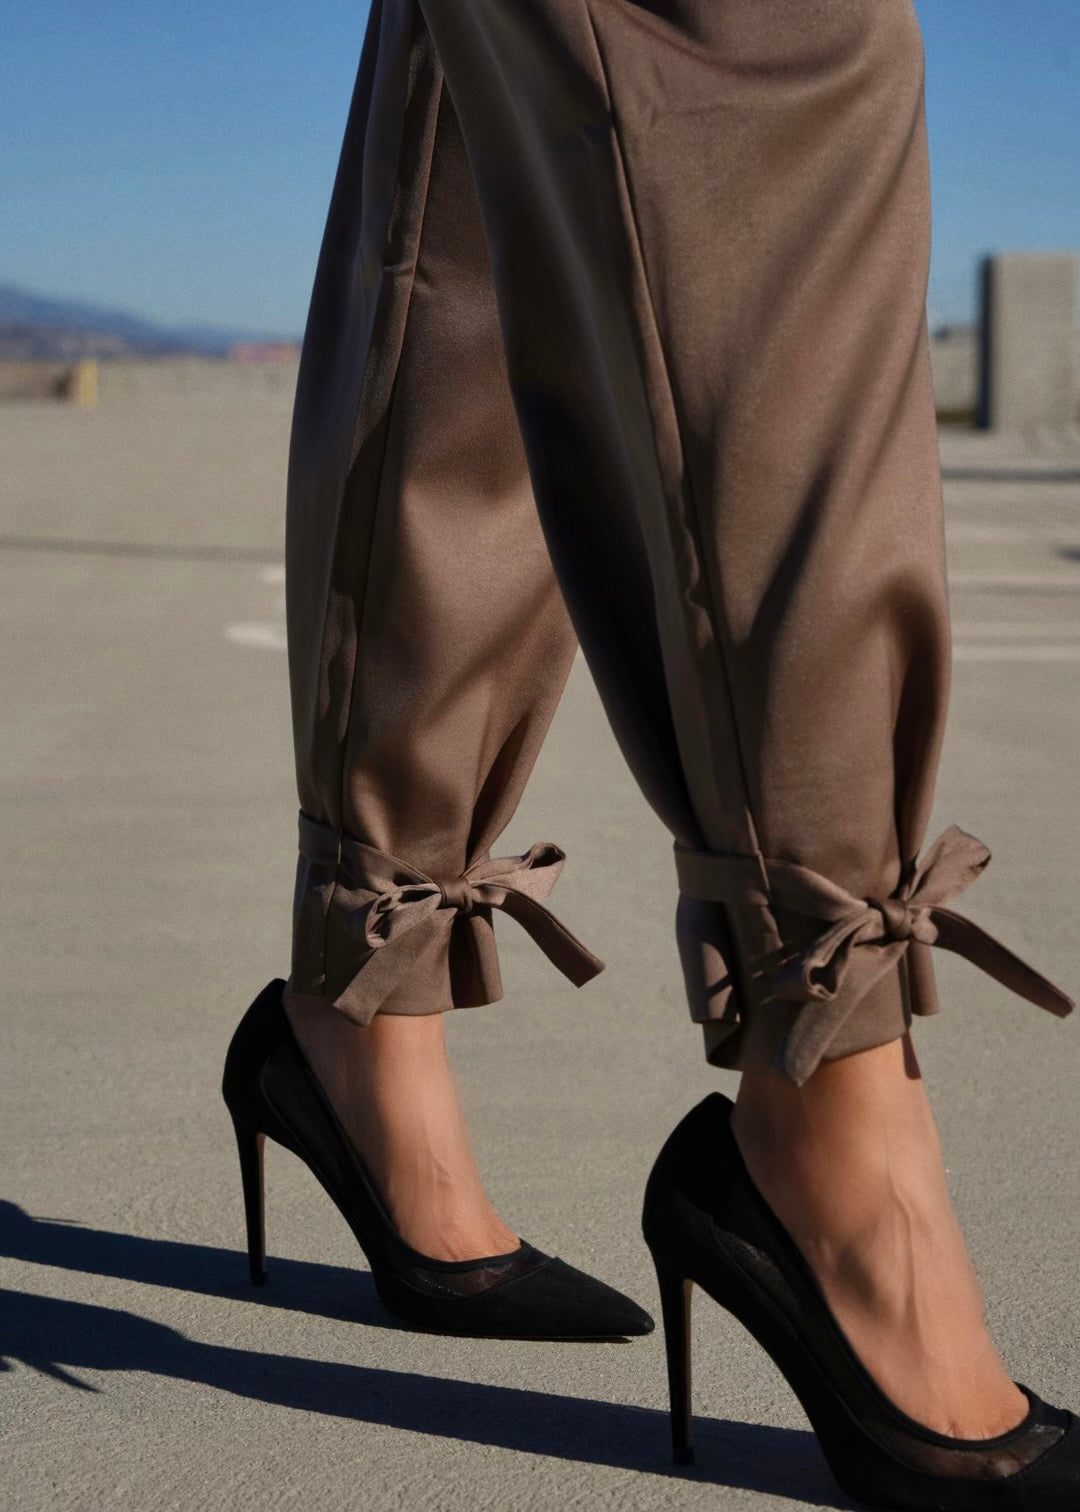 Ankle Tie Pants – Shop May